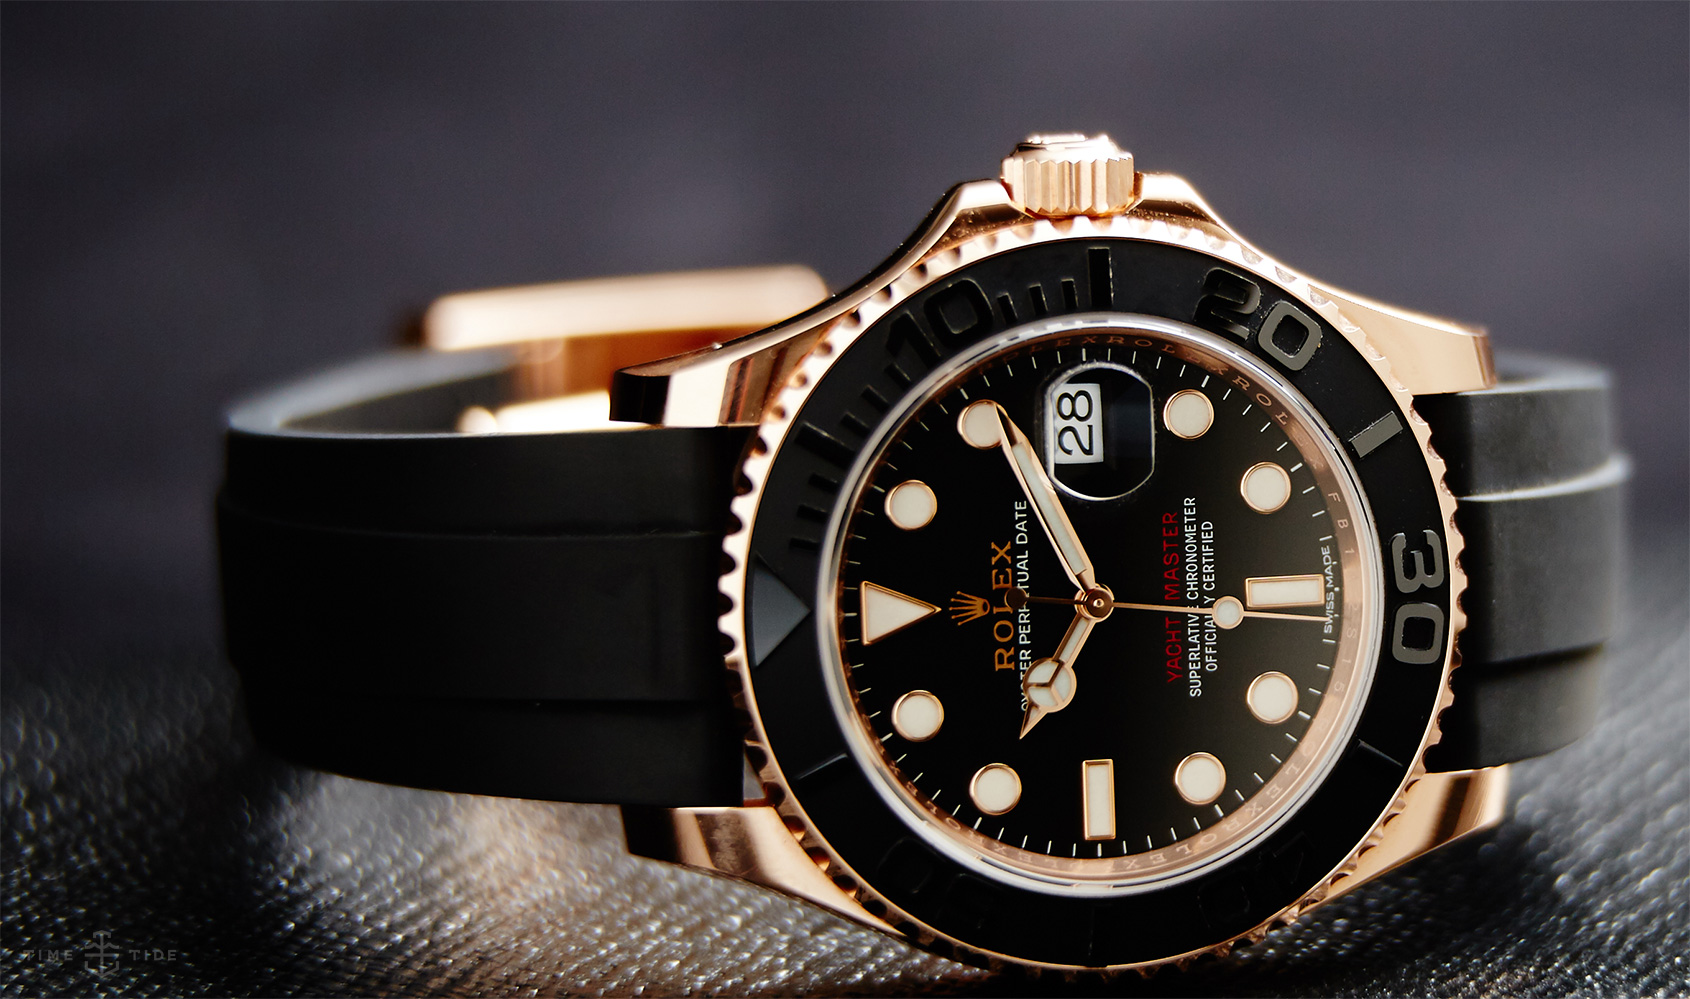 The black Oysterflex strap makes the best copy Rolex more dynamic.